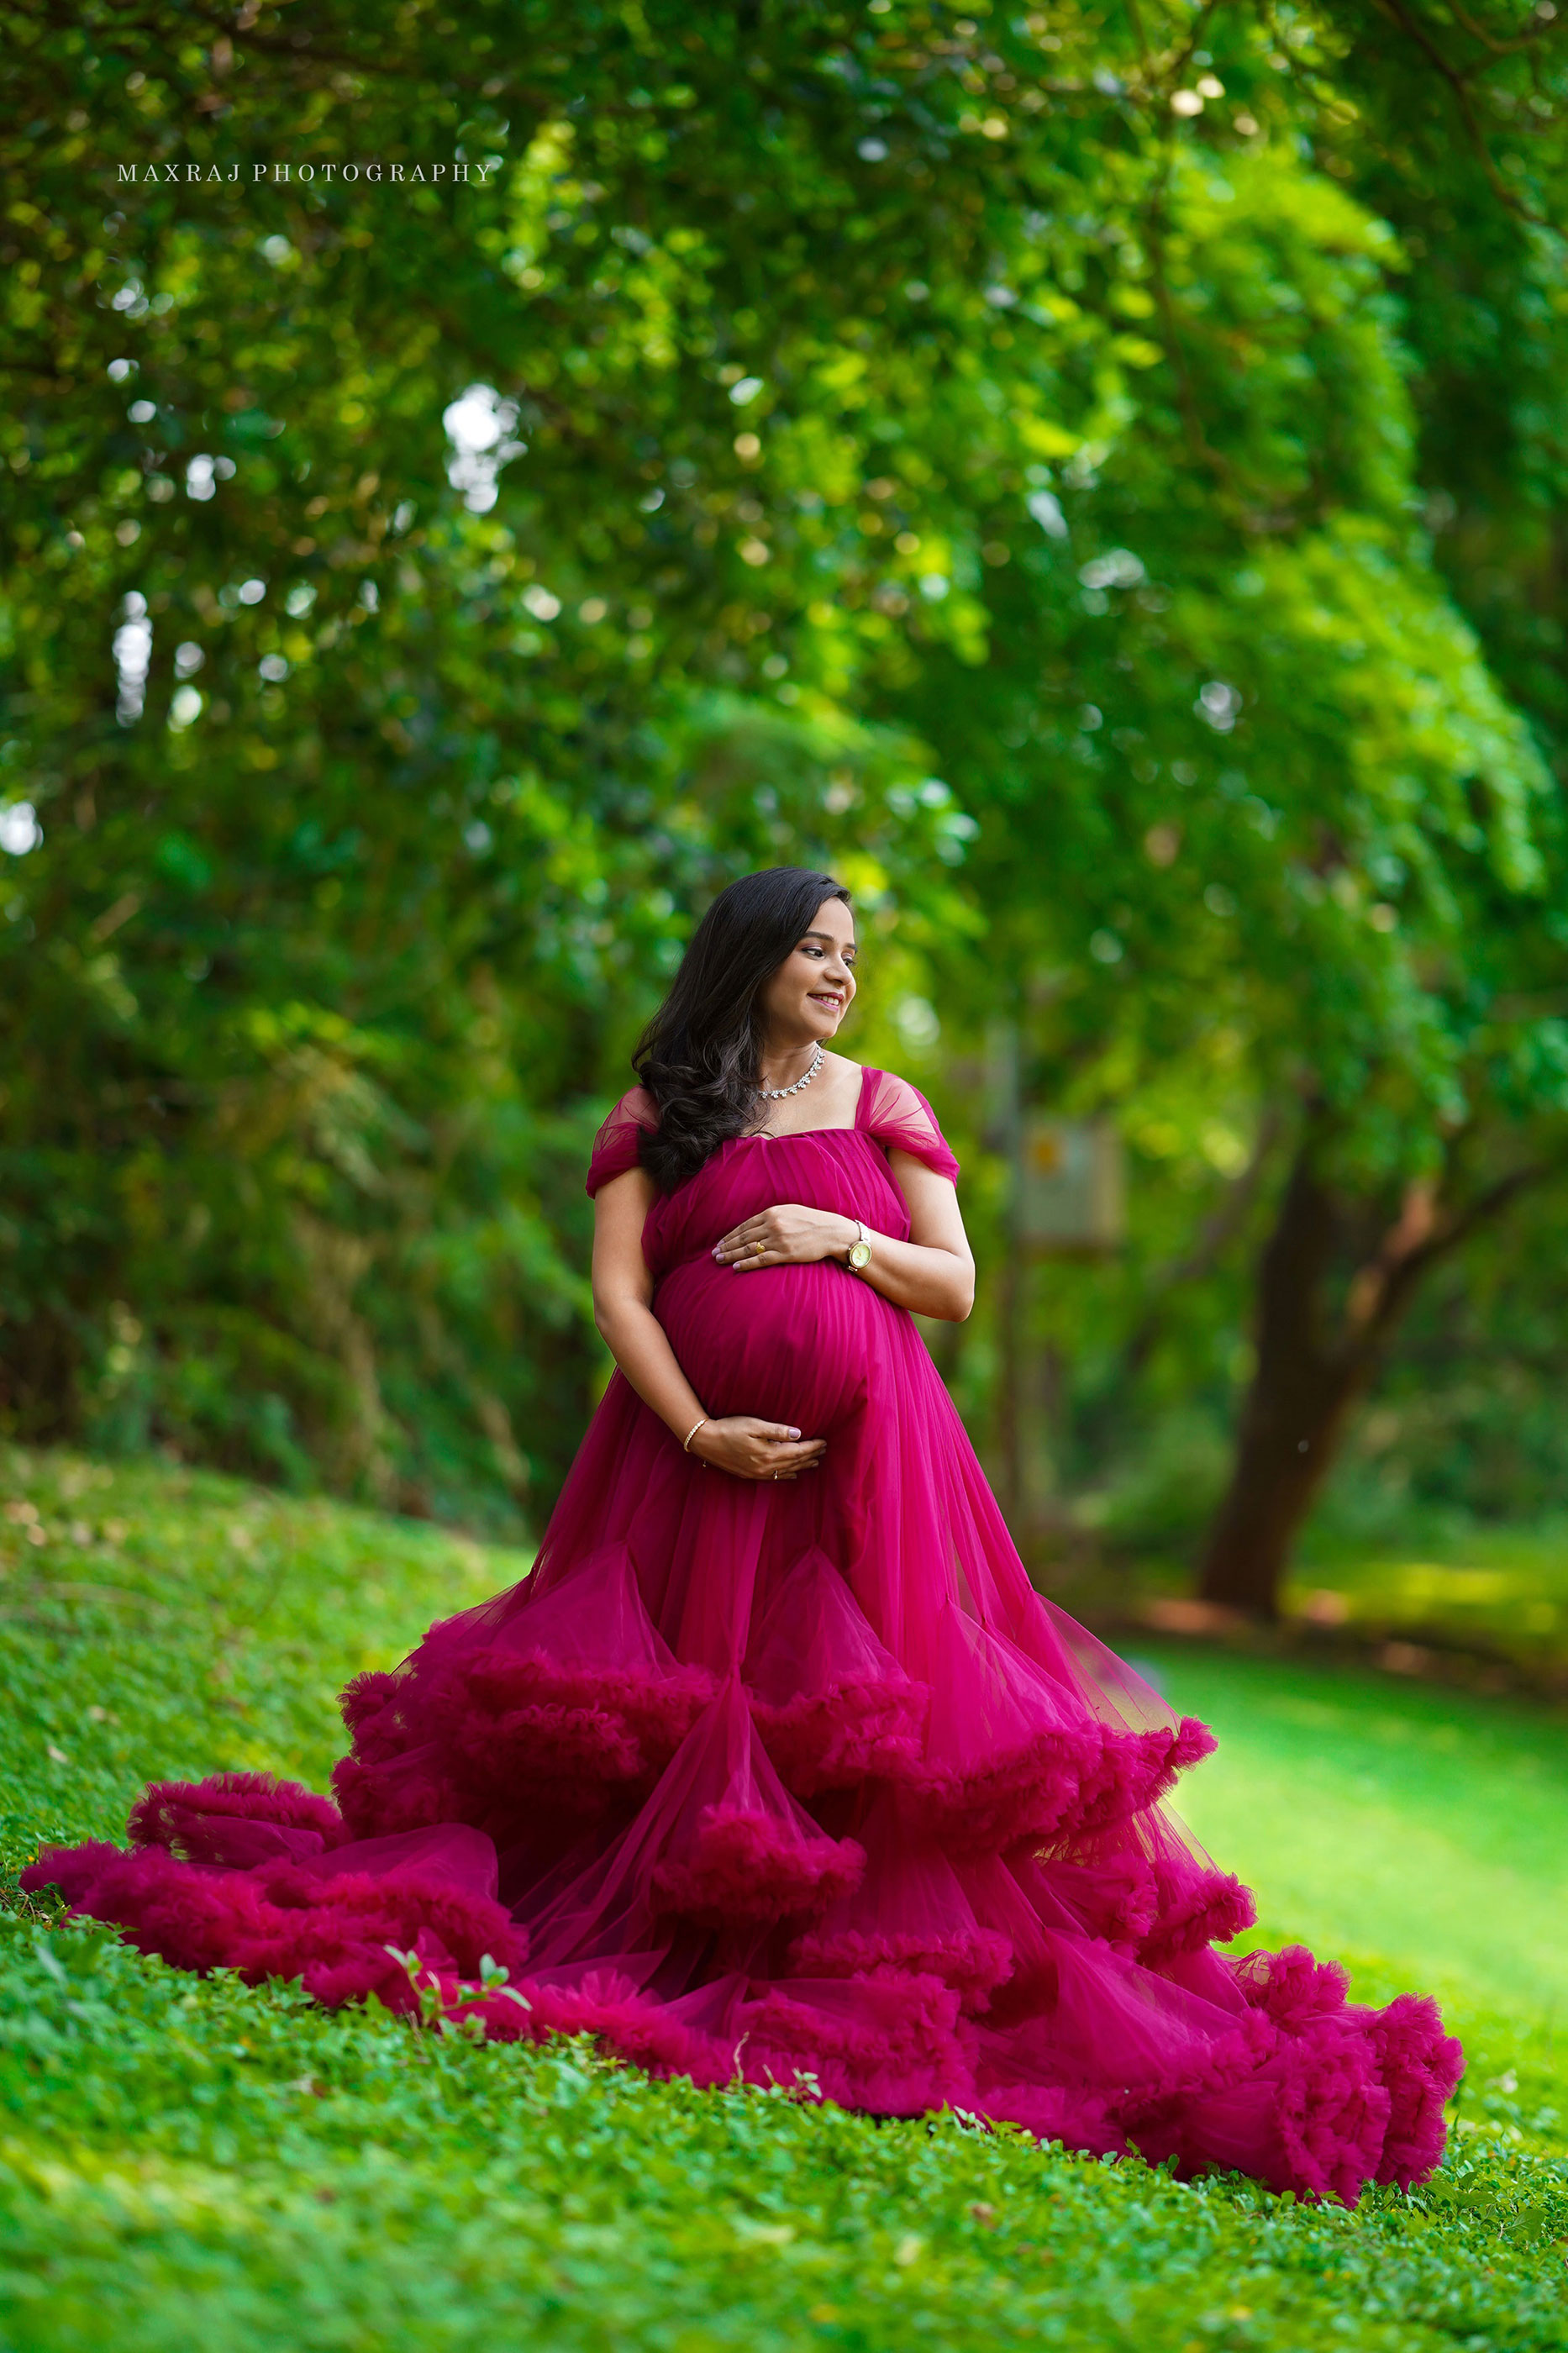 best maternity photographer in pune, best maternity photographer in india, outdoor pregnancy photoshoot in pune